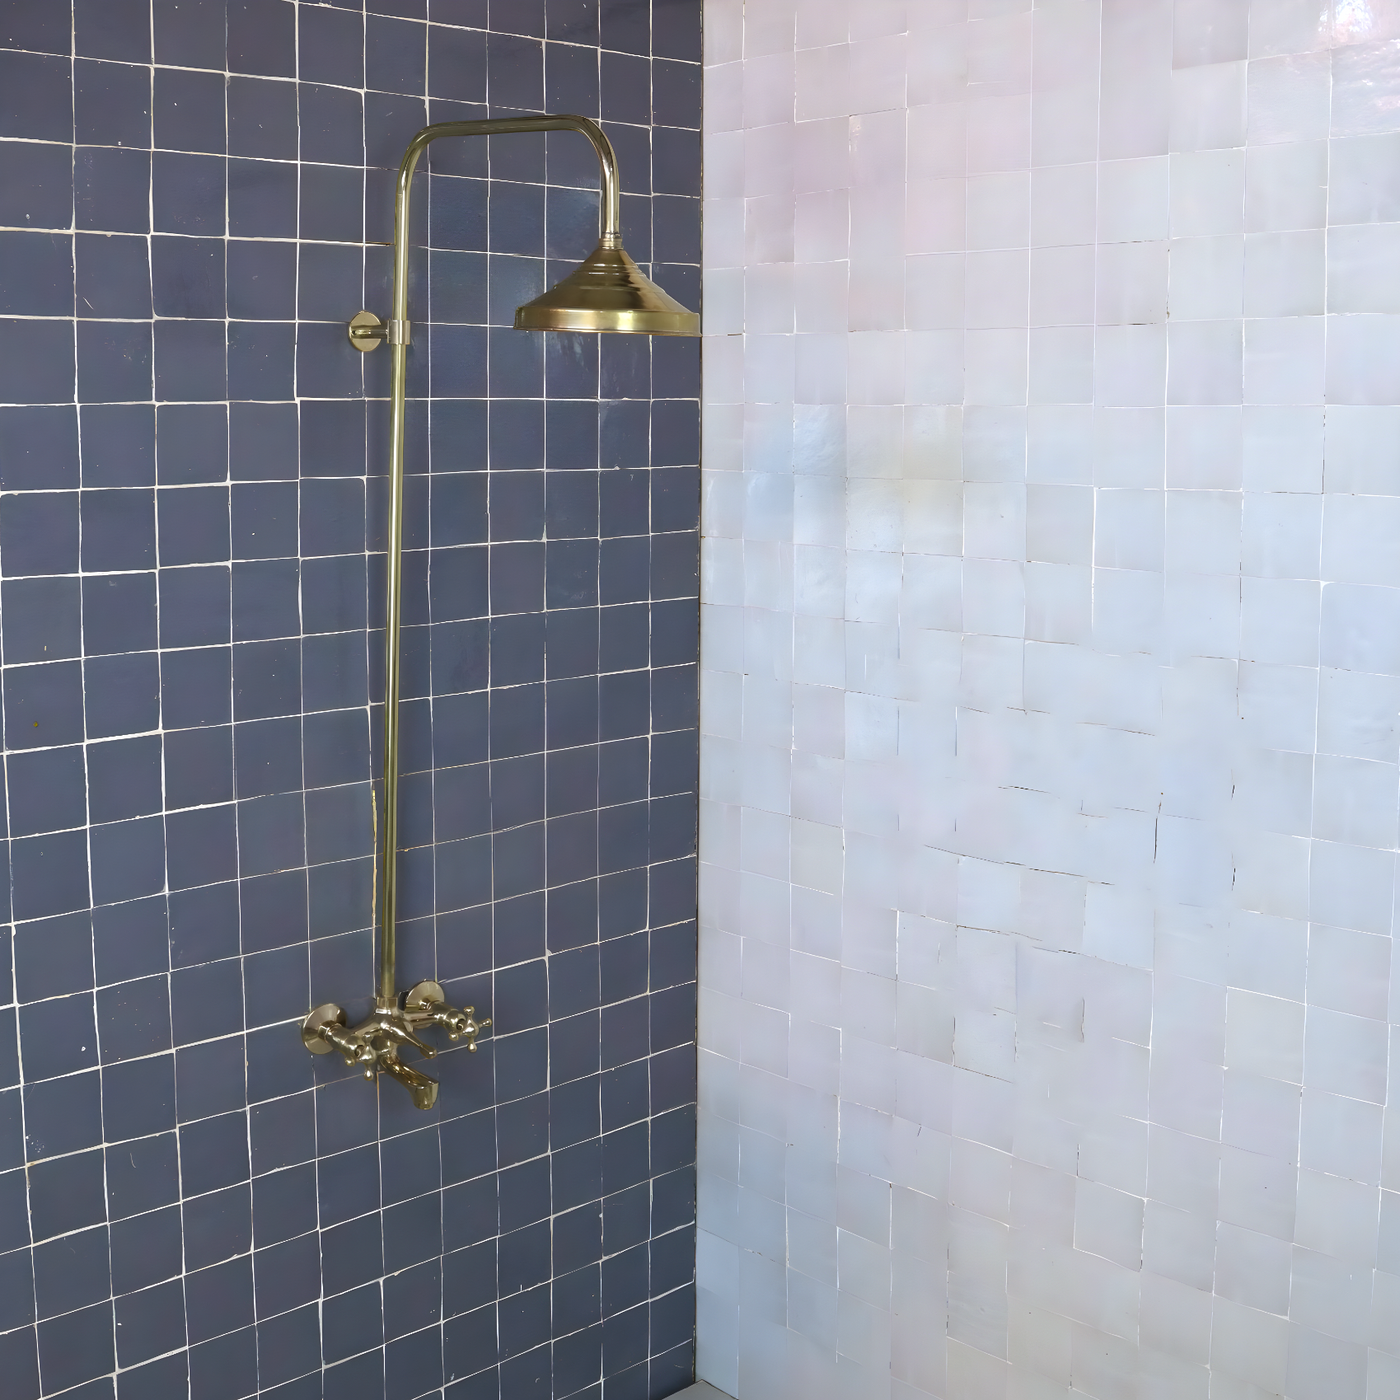 UNLACQUERED BRASS EXPOSED SHOWER HEAD WITH TUB FILLER - Triazadesigns